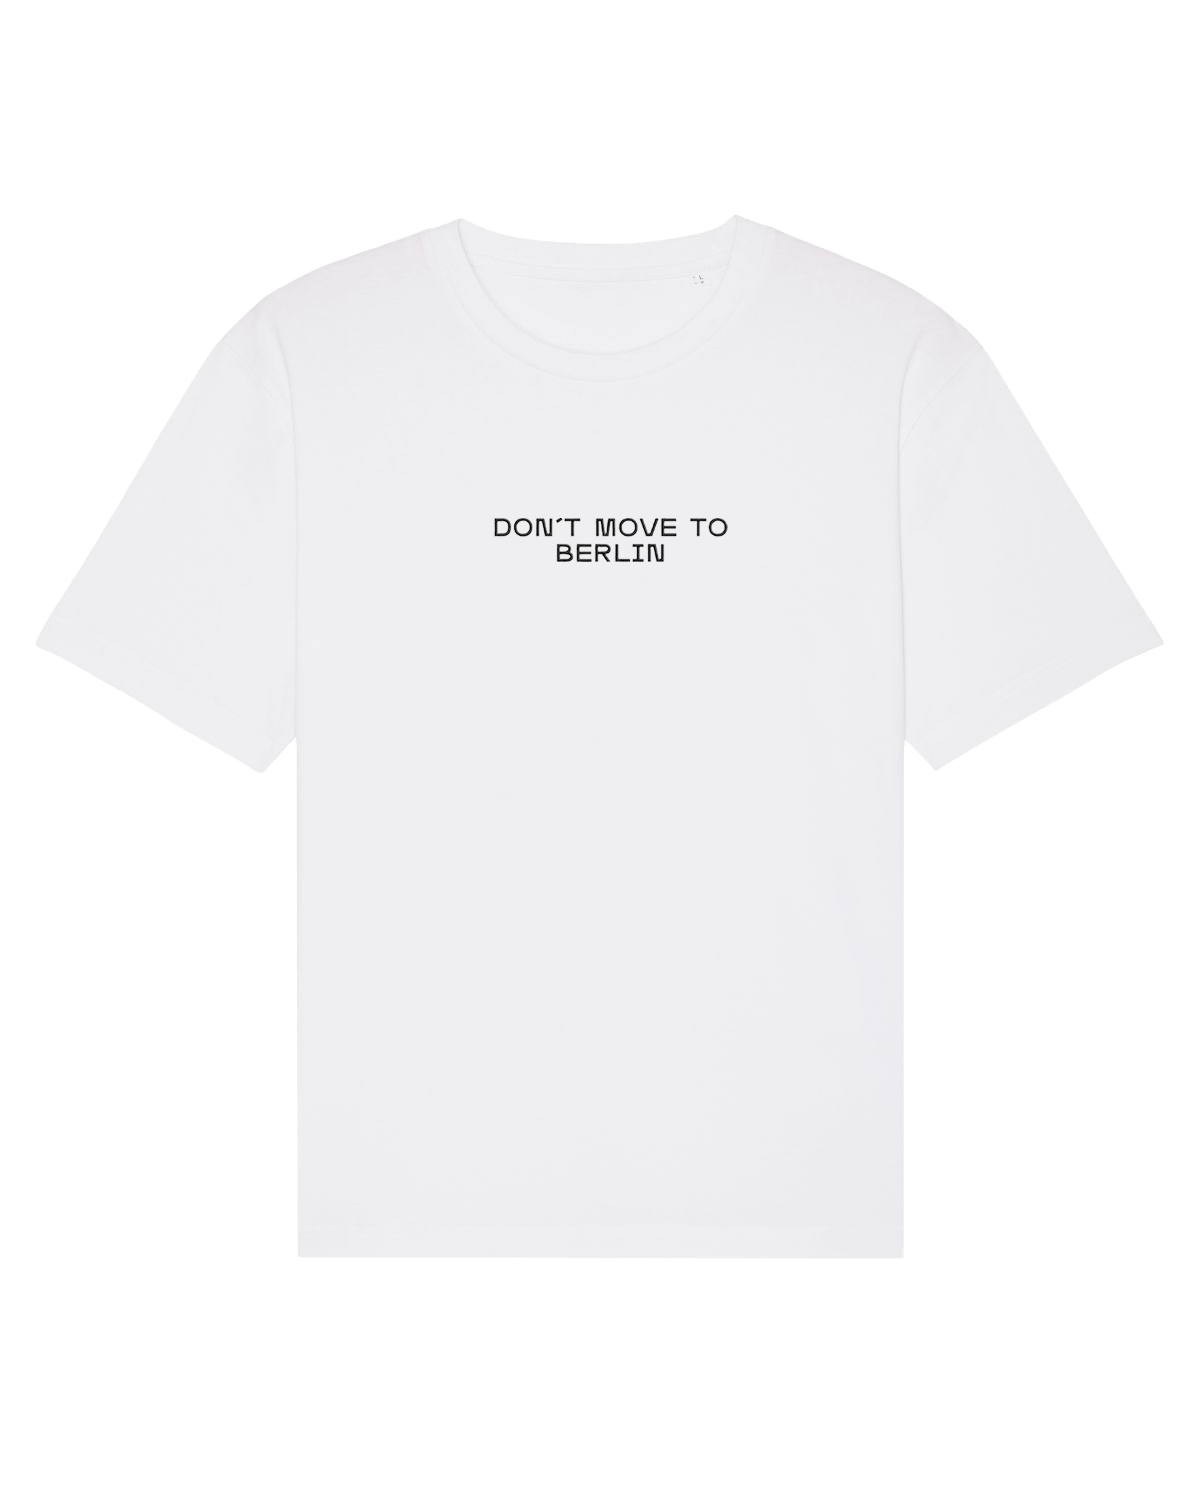 "DON'T MOVE TO BERLIN" - T-shirt